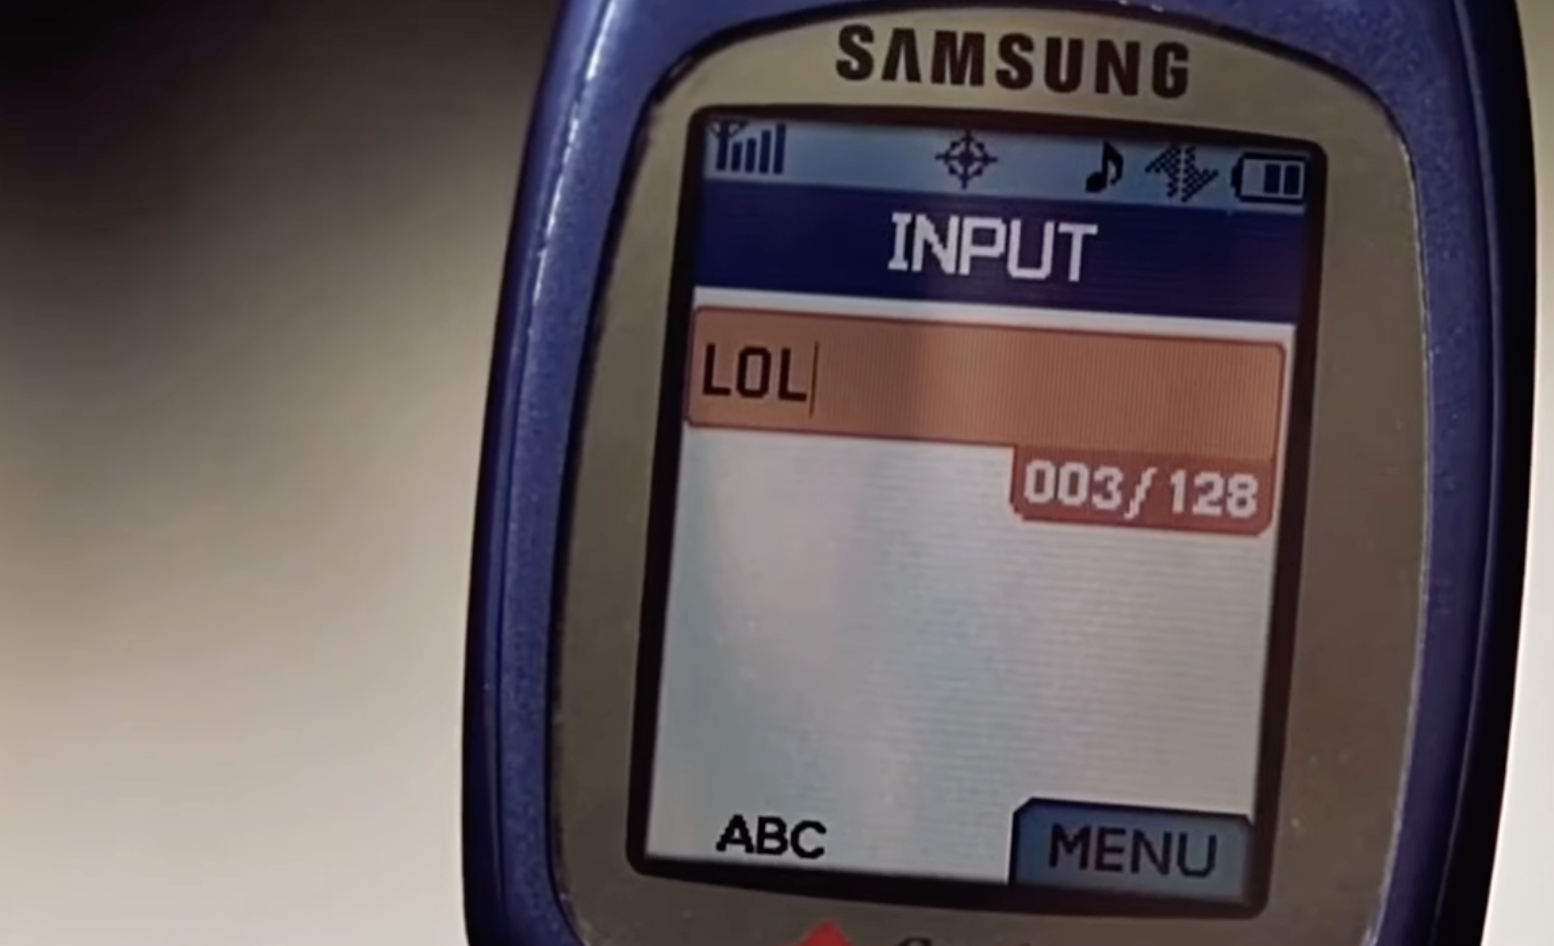 Old Samsung flip phone screen displaying text message inbox with &quot;LOL&quot; as the content of a message